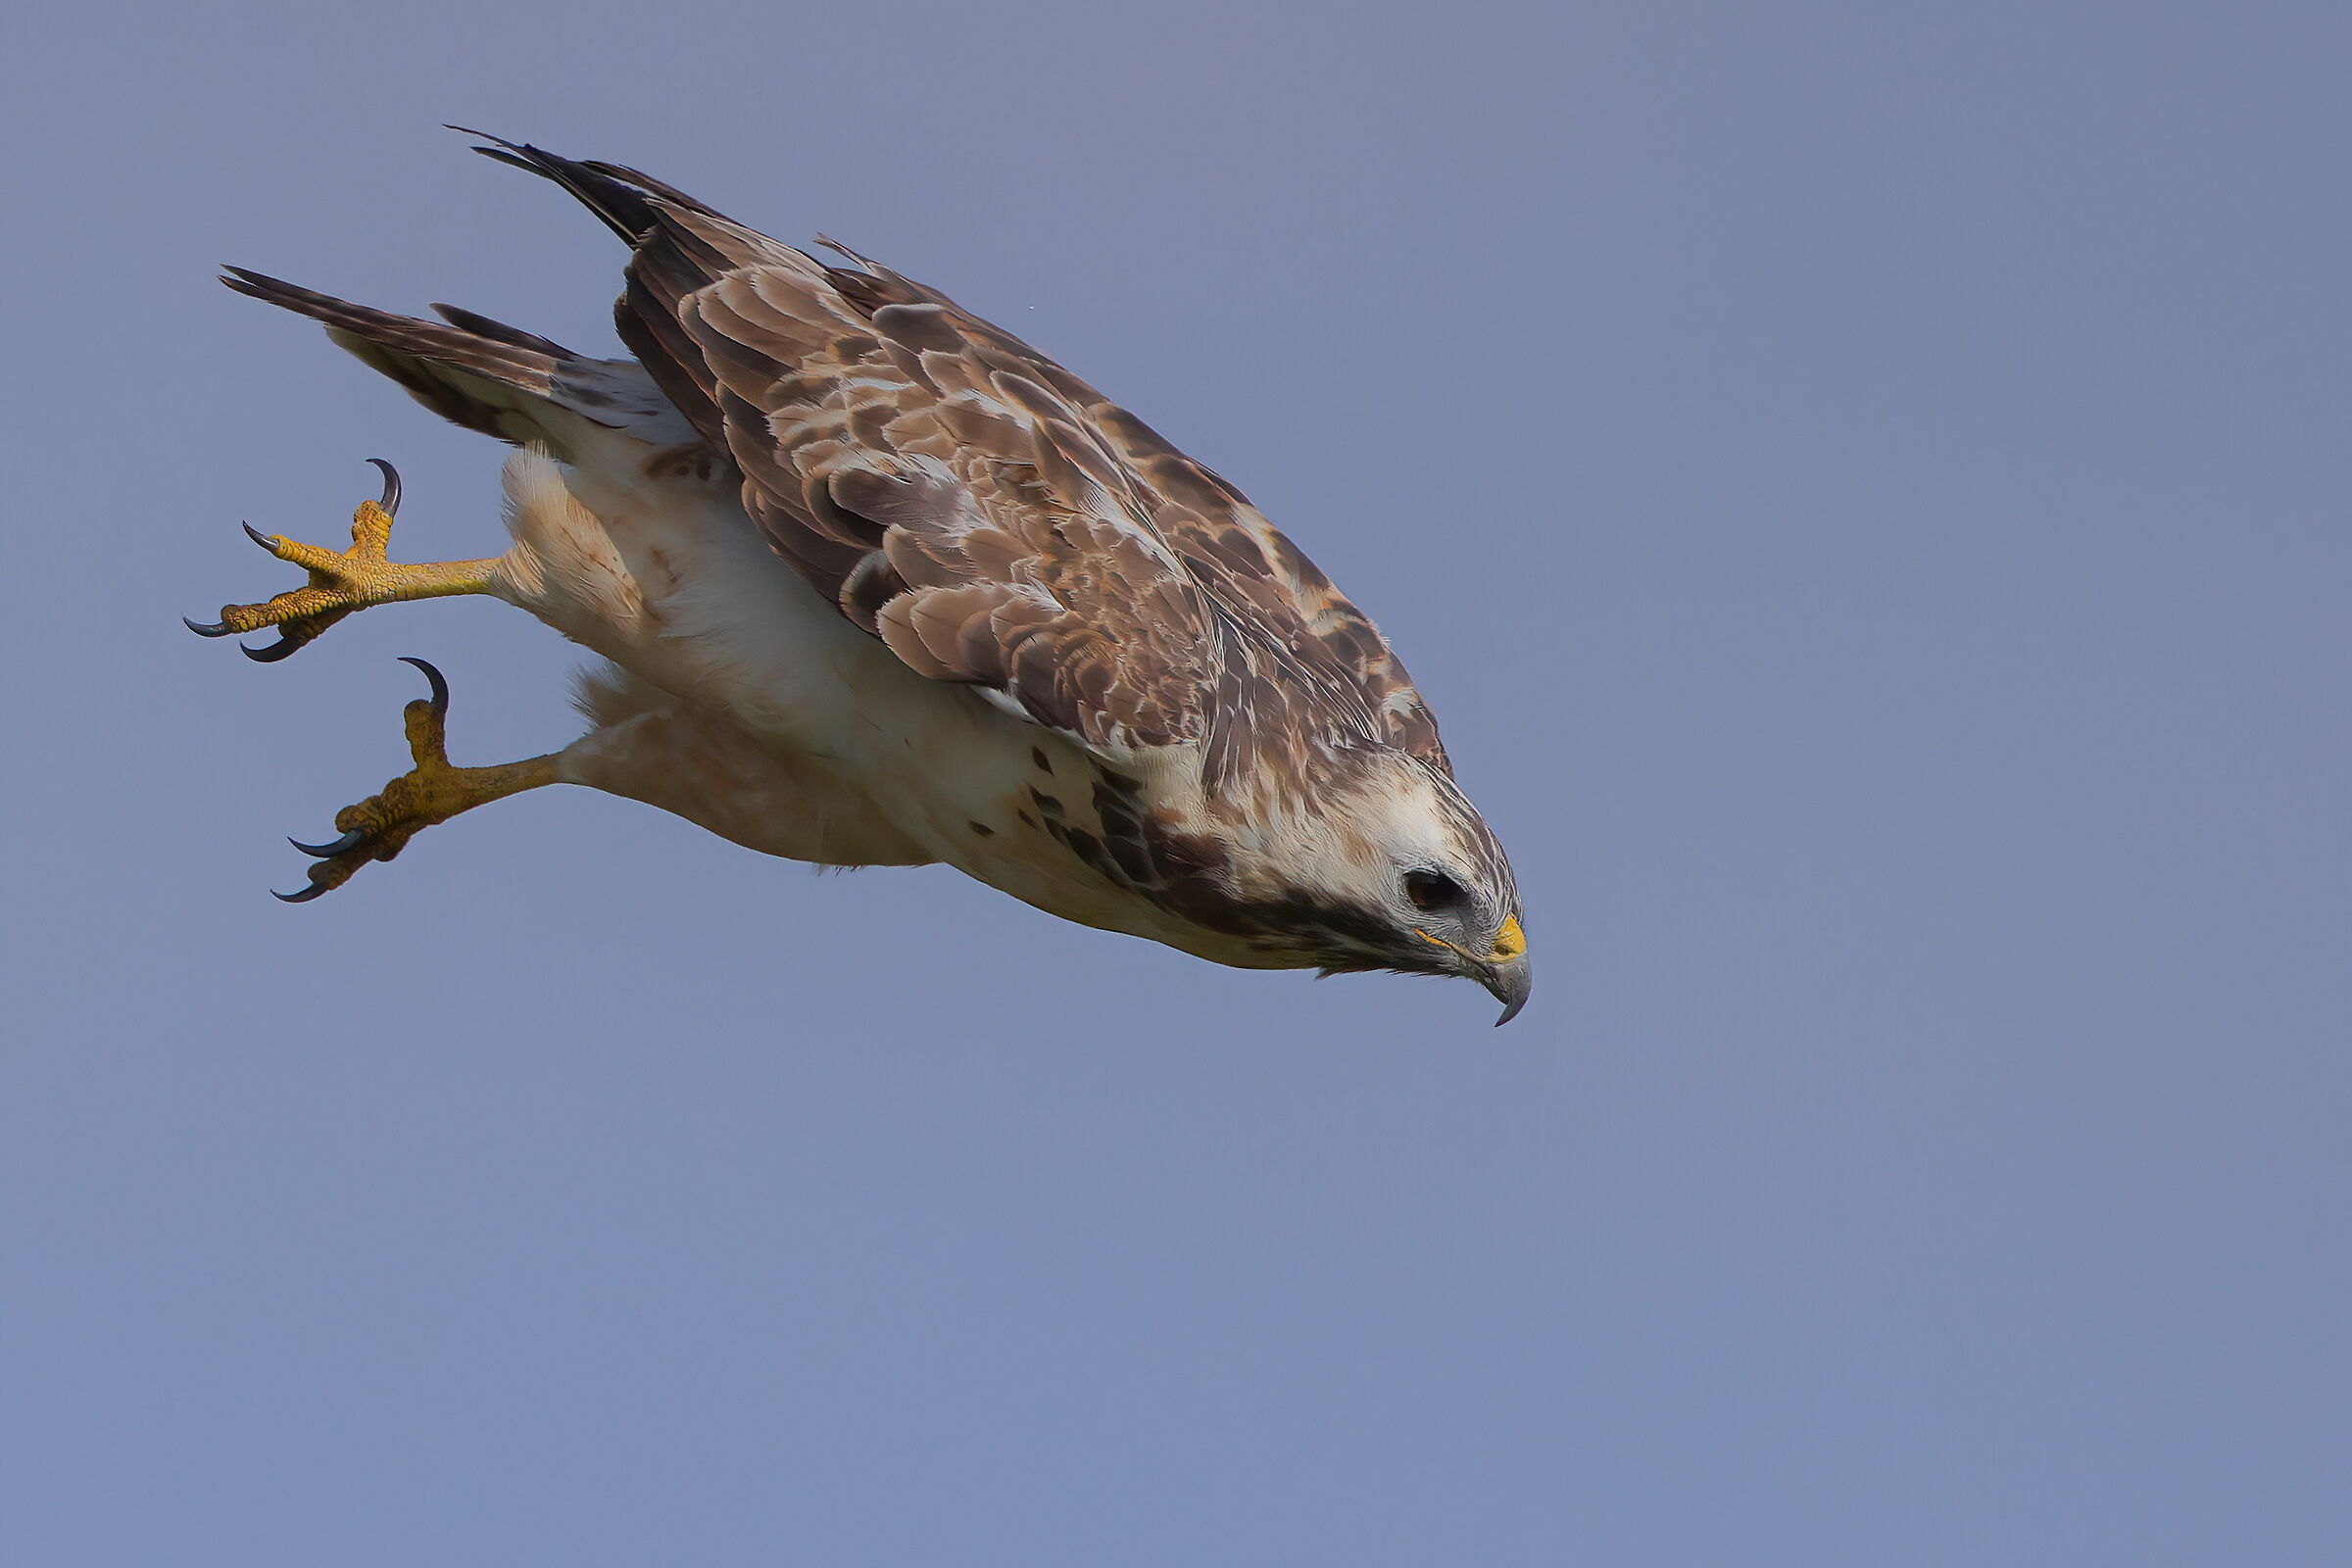 Swooping on prey...